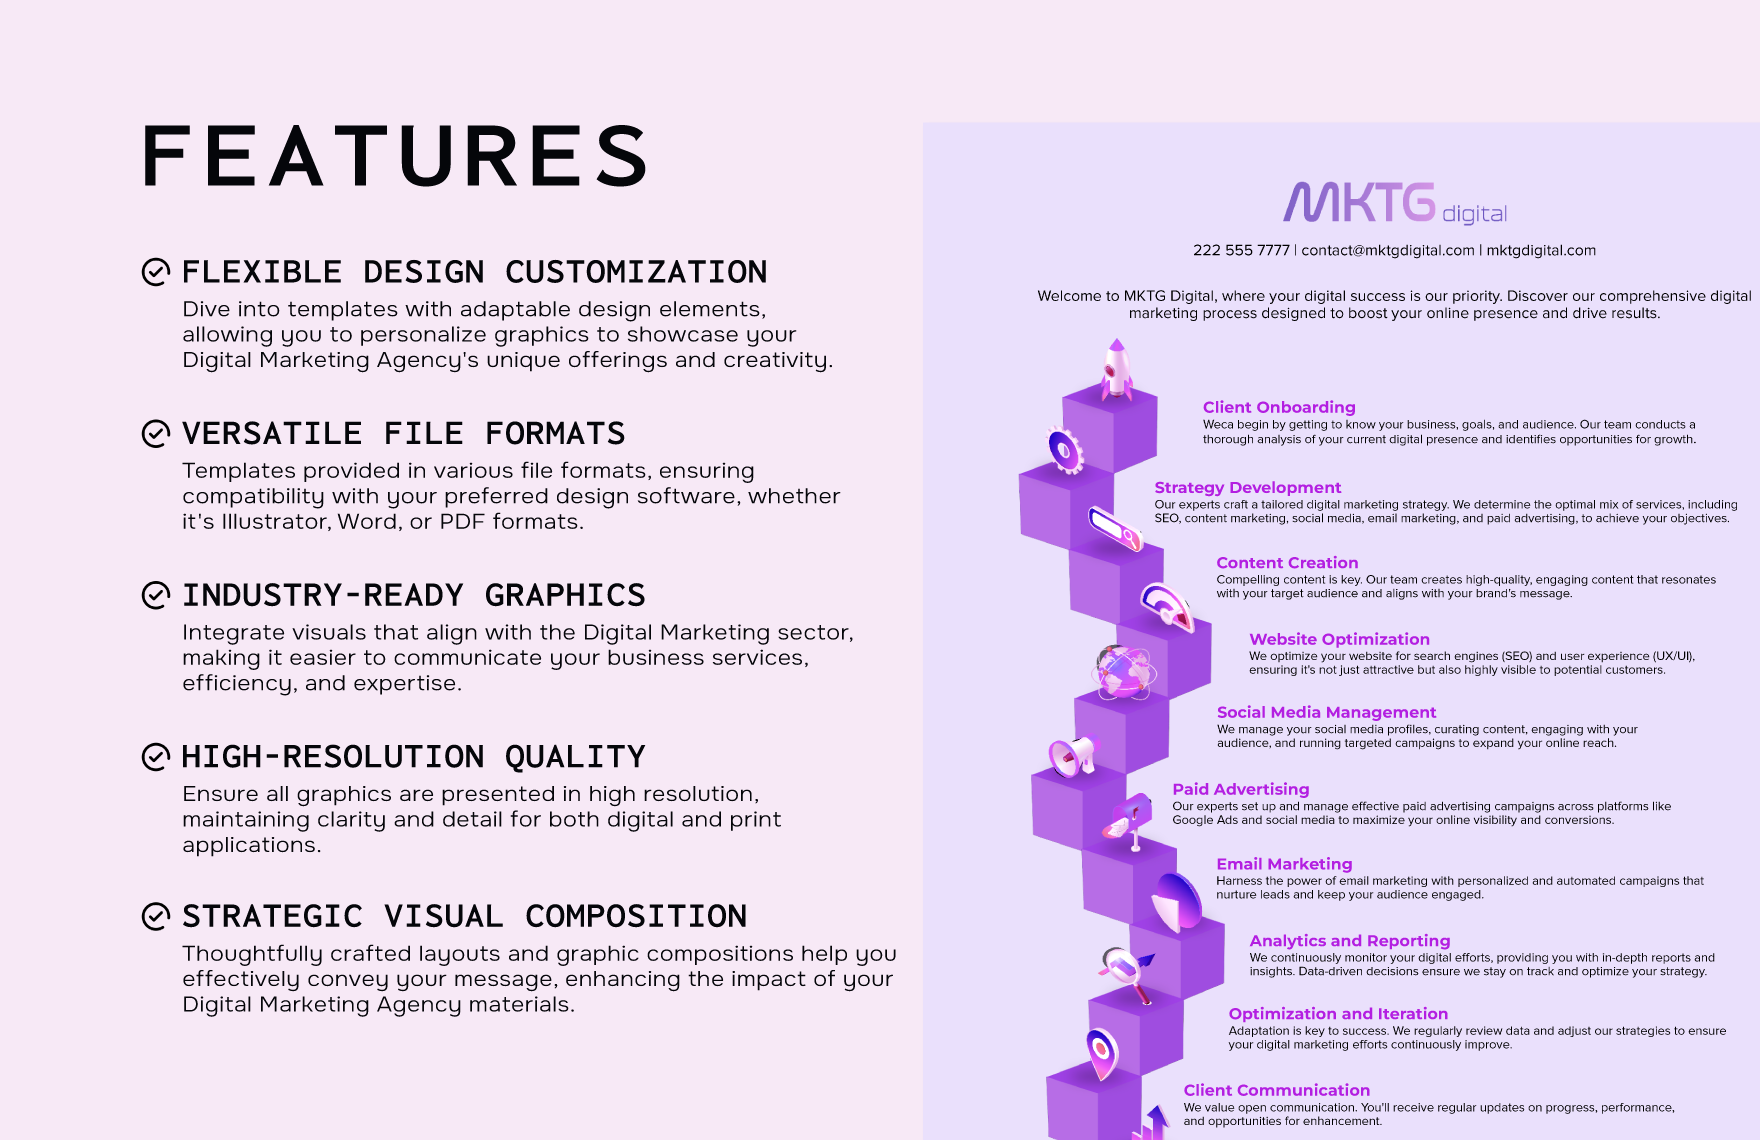 Digital Marketing Agency Process Infographic Template